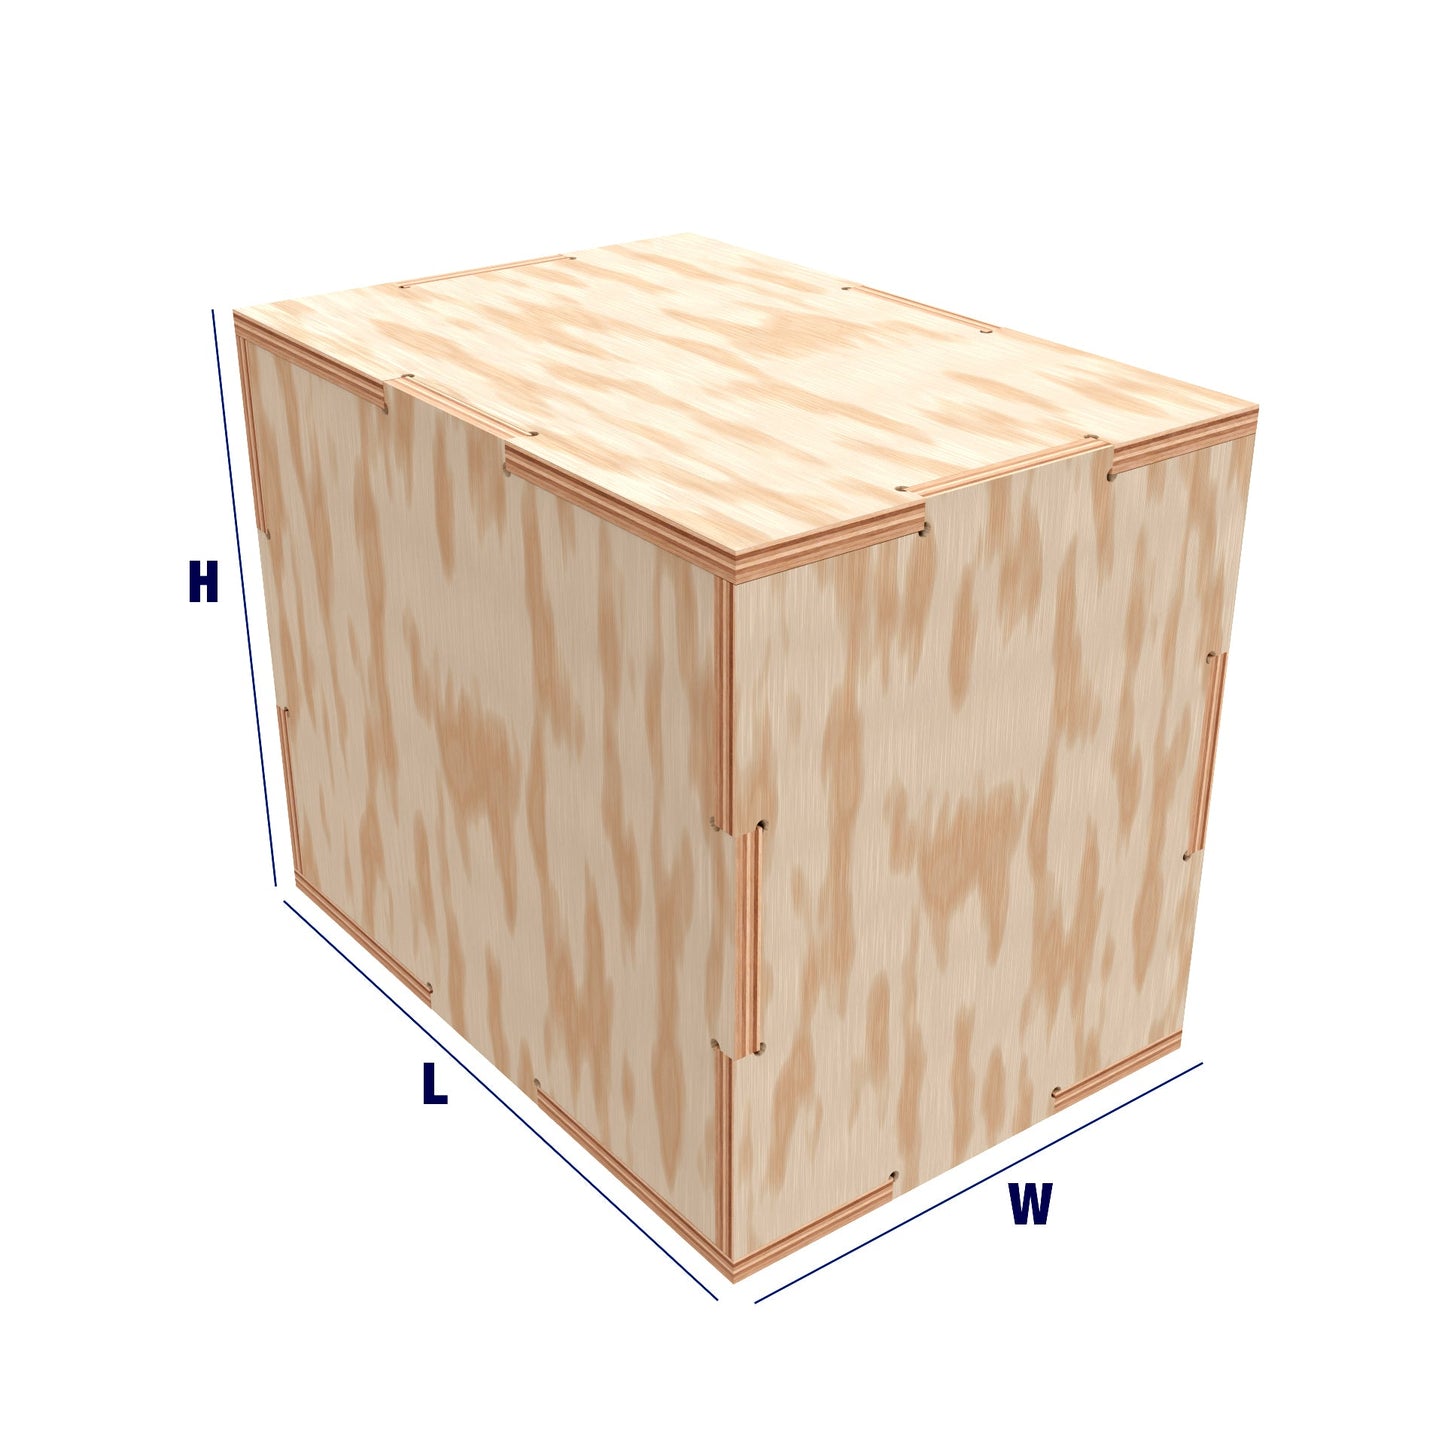 Plywood Shipping Crate 24x20x20